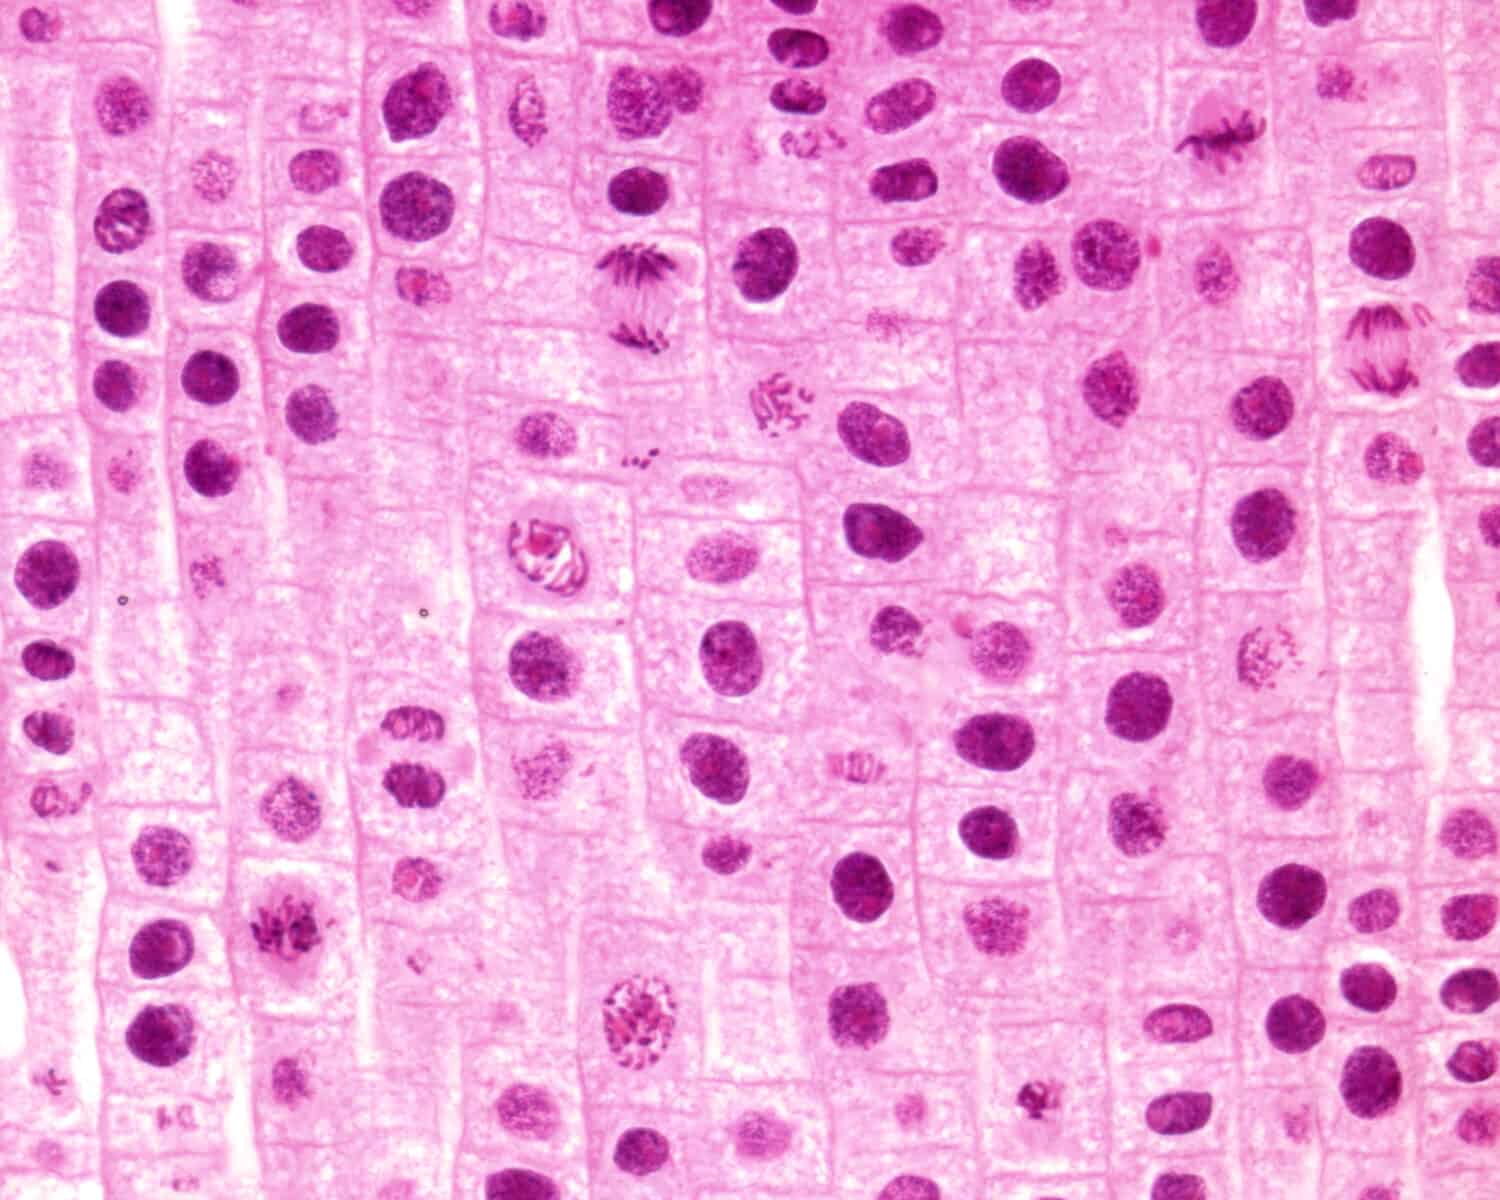 Light microscope micrograph showing mitosis in onion cells of the root meristem. Two examples of each prophase, metaphase and anaphase can be seen.